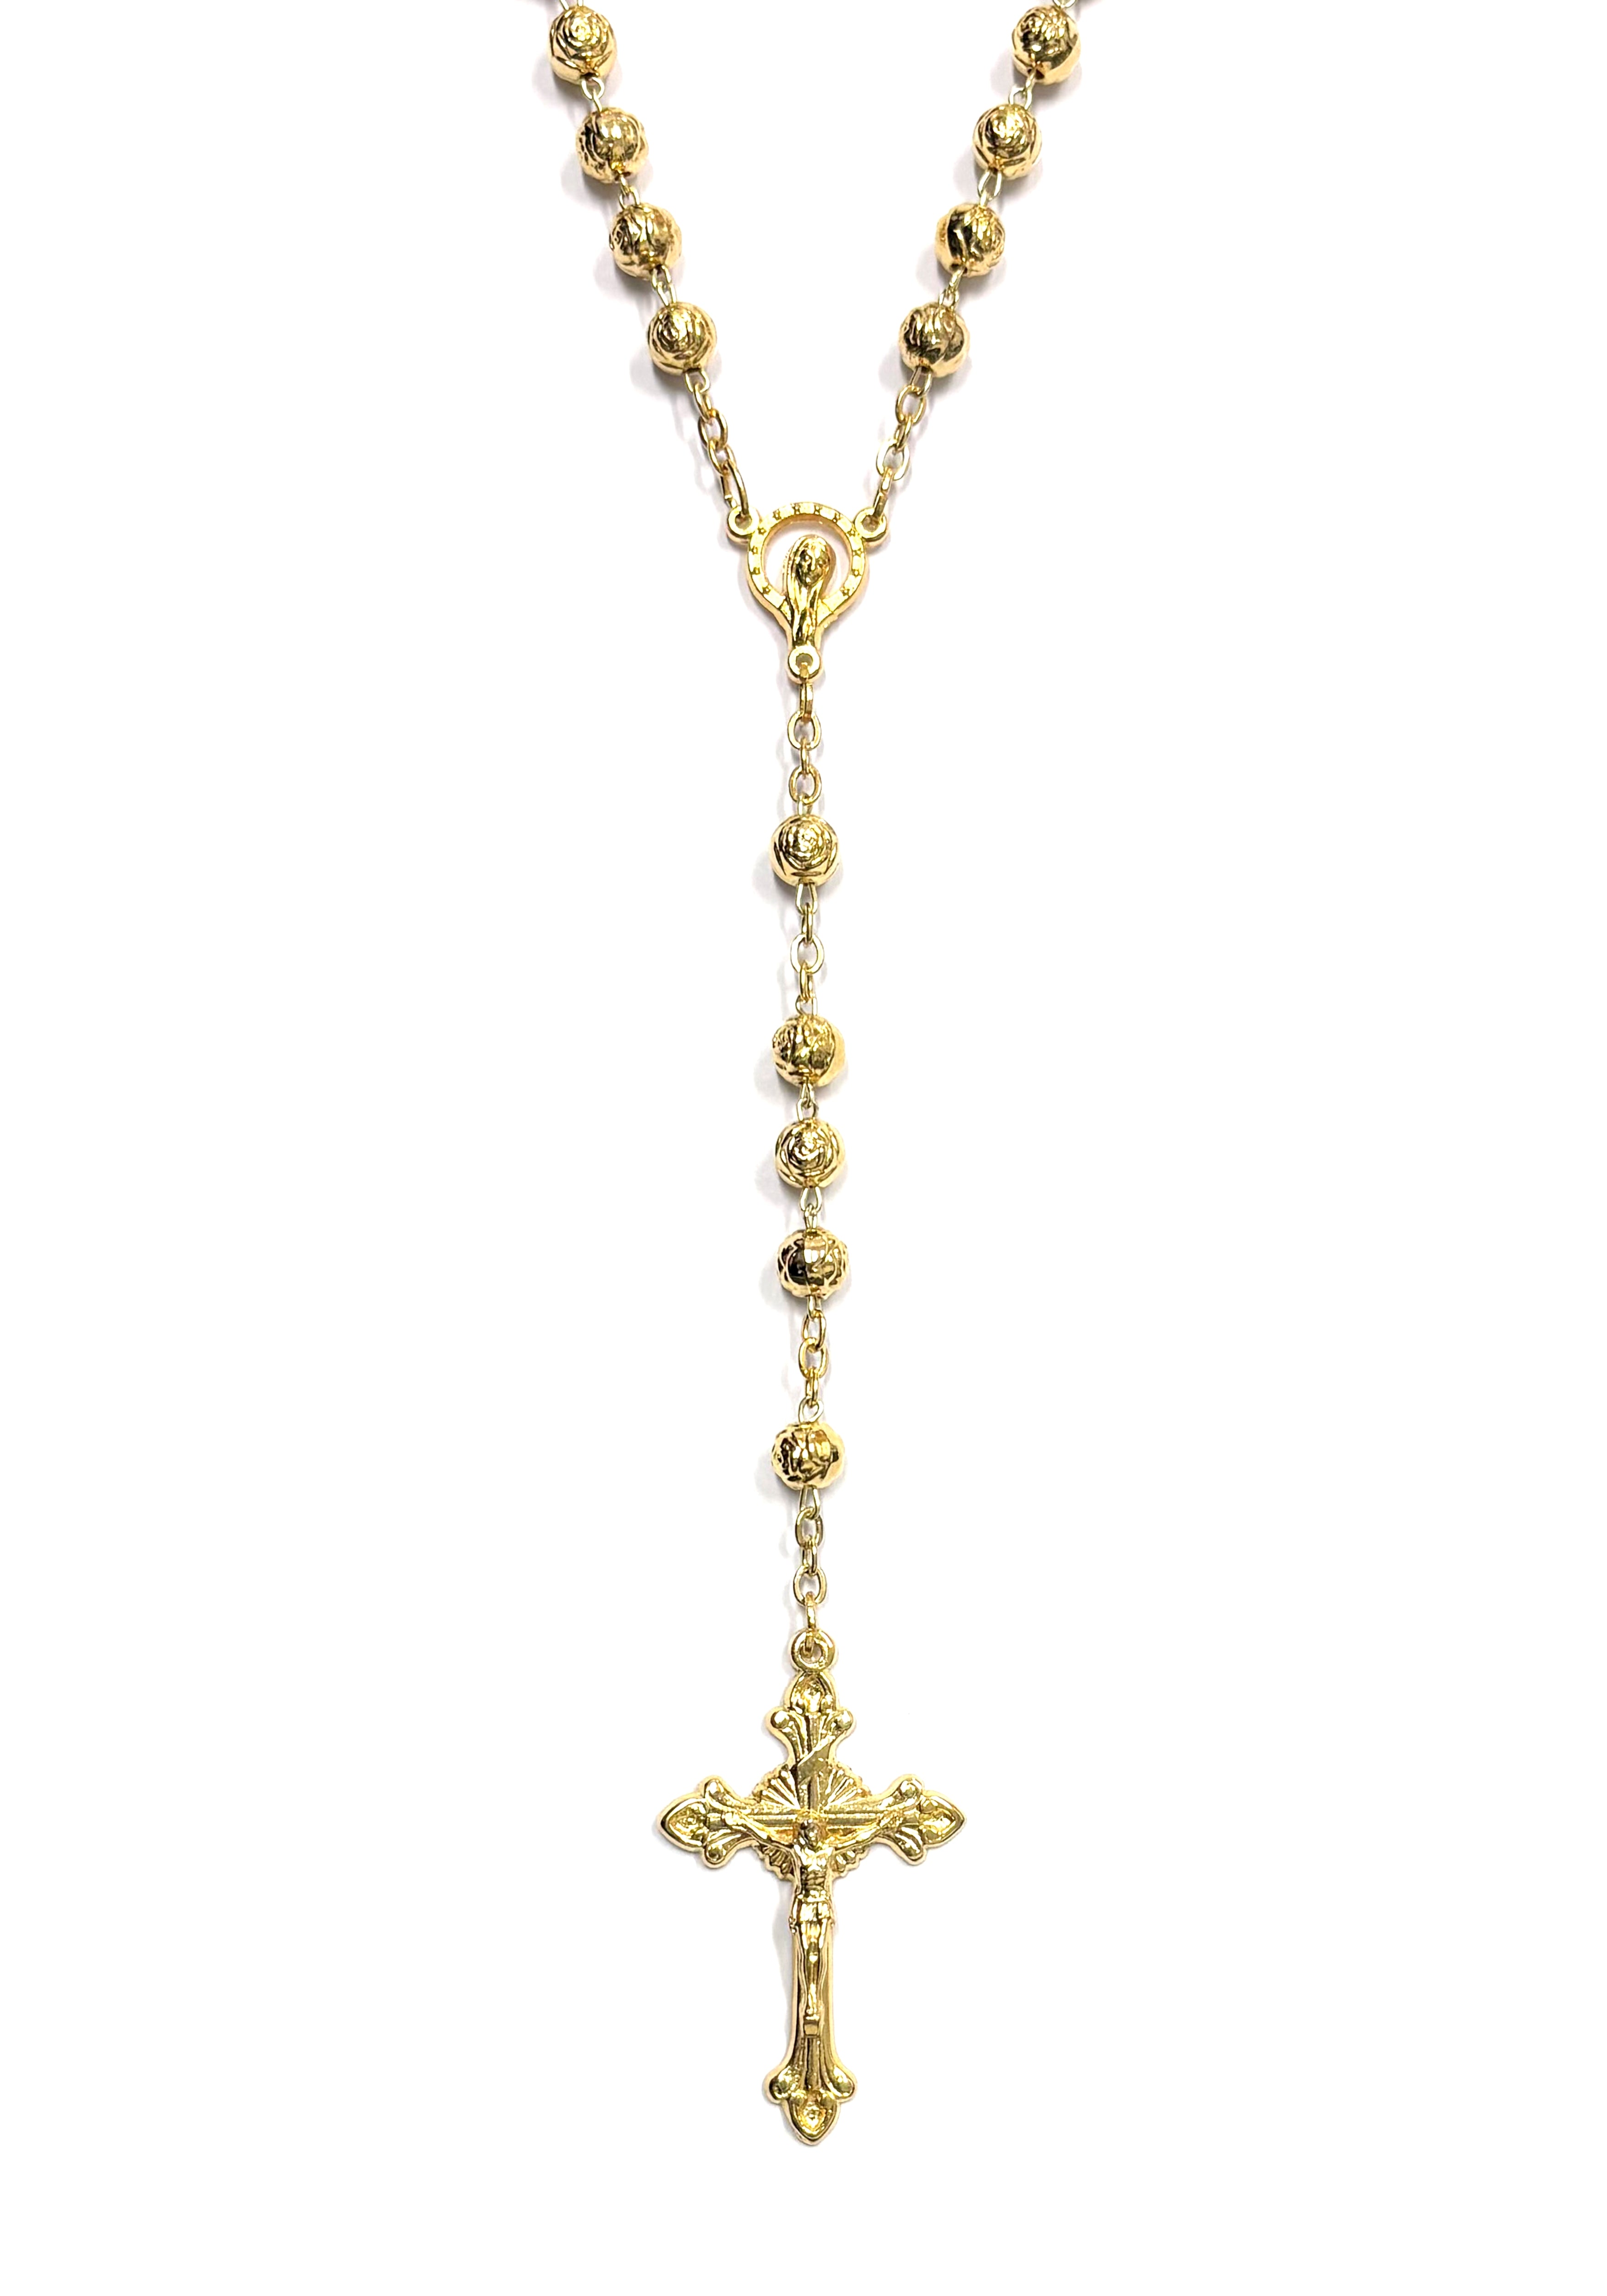 Gold rose-shaped beads rosary